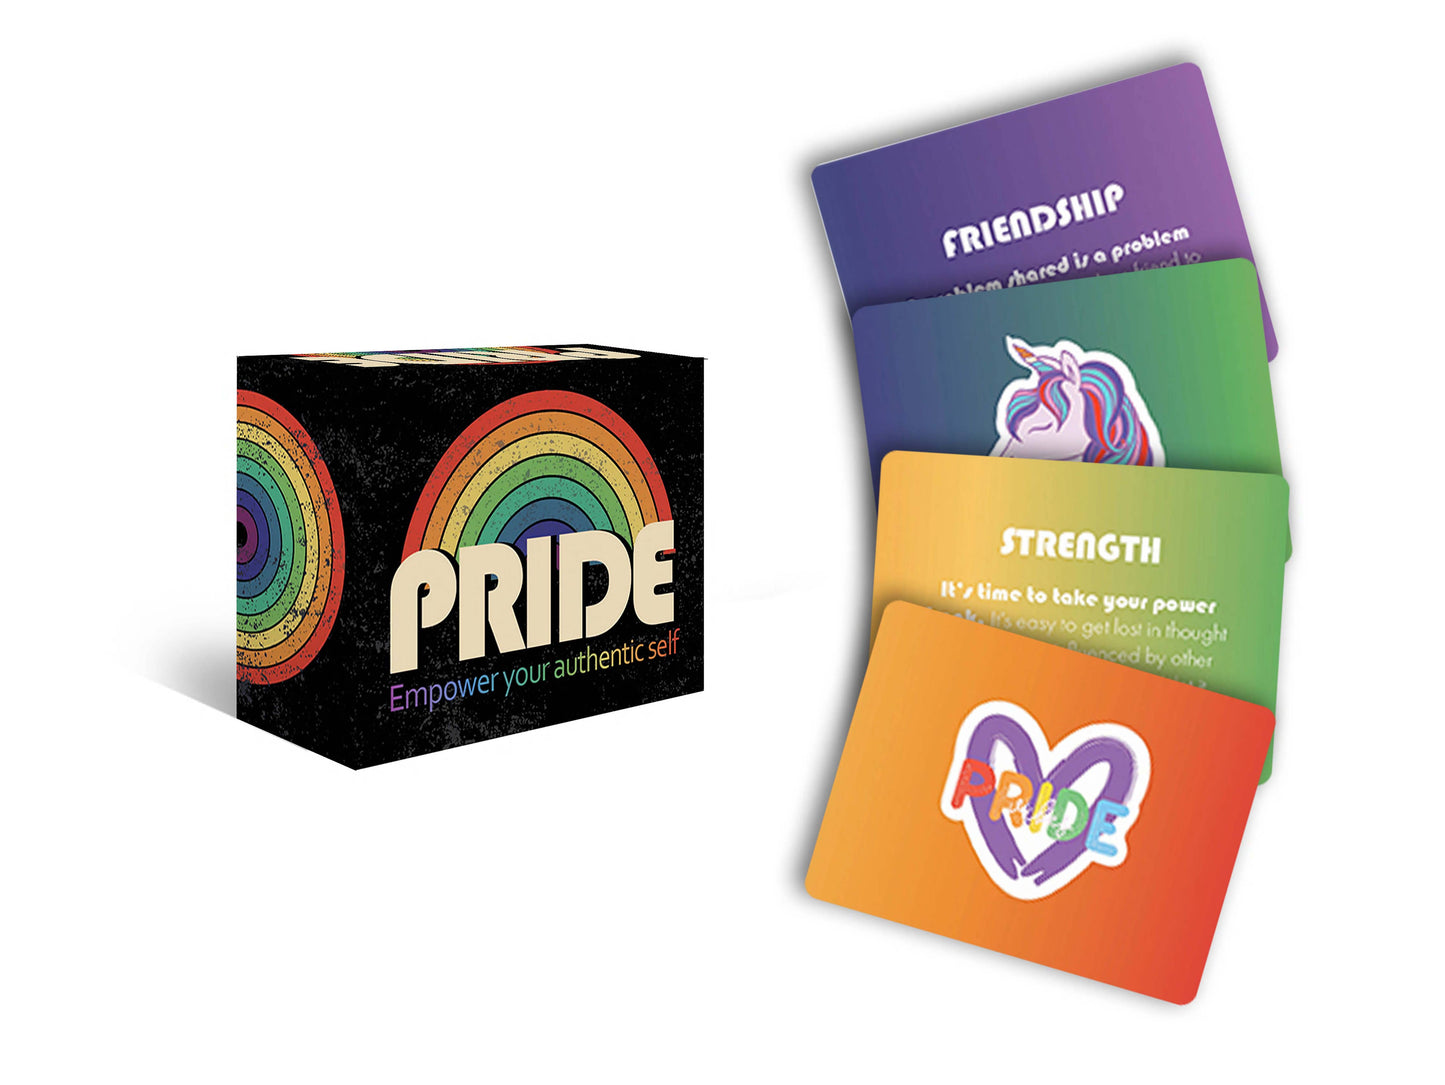 Pride: Empower Your Authentic Self (40 Inspiration Cards)